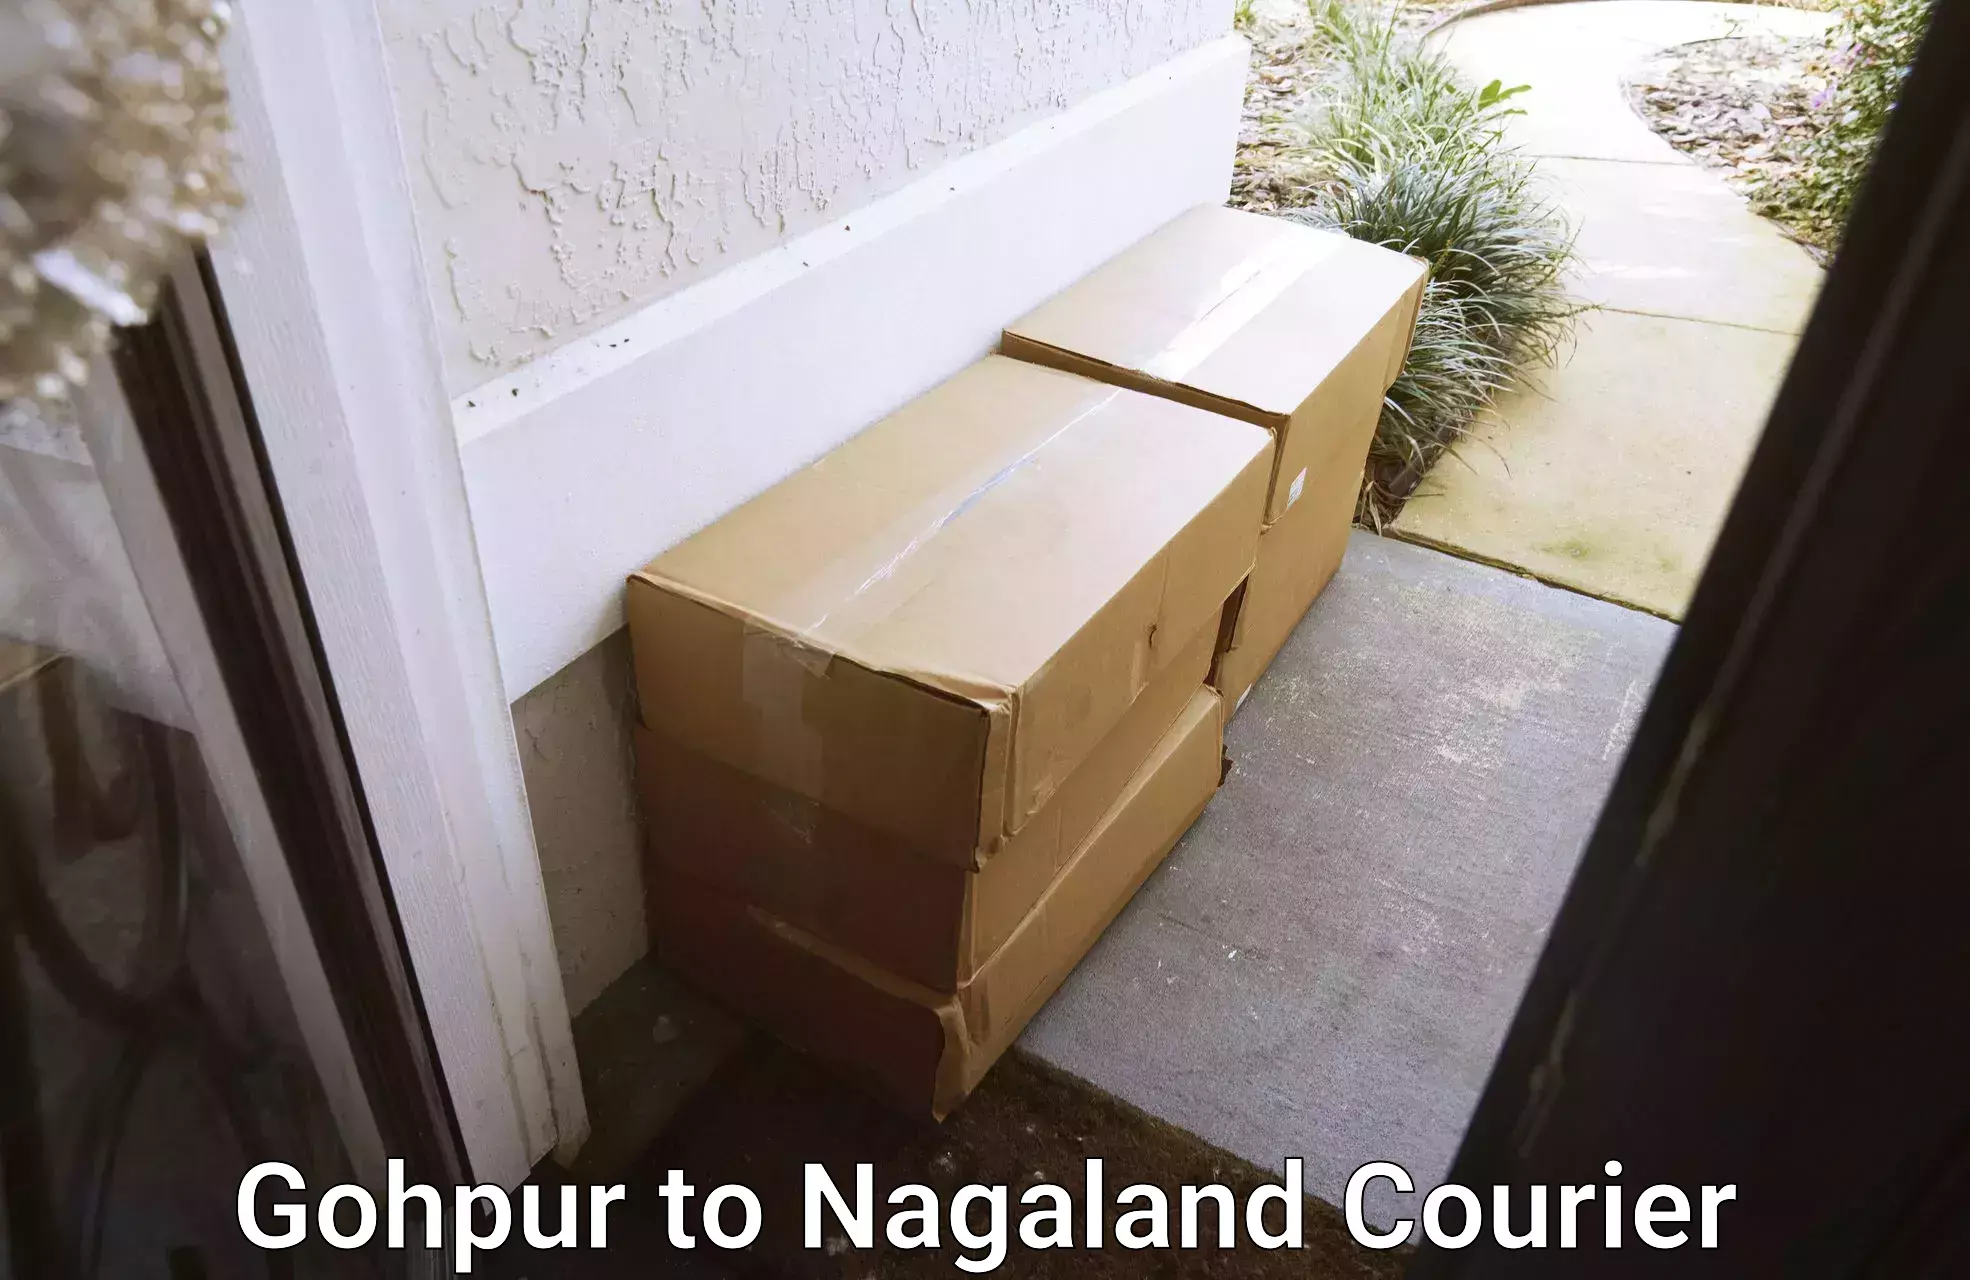 Reliable courier service Gohpur to Nagaland